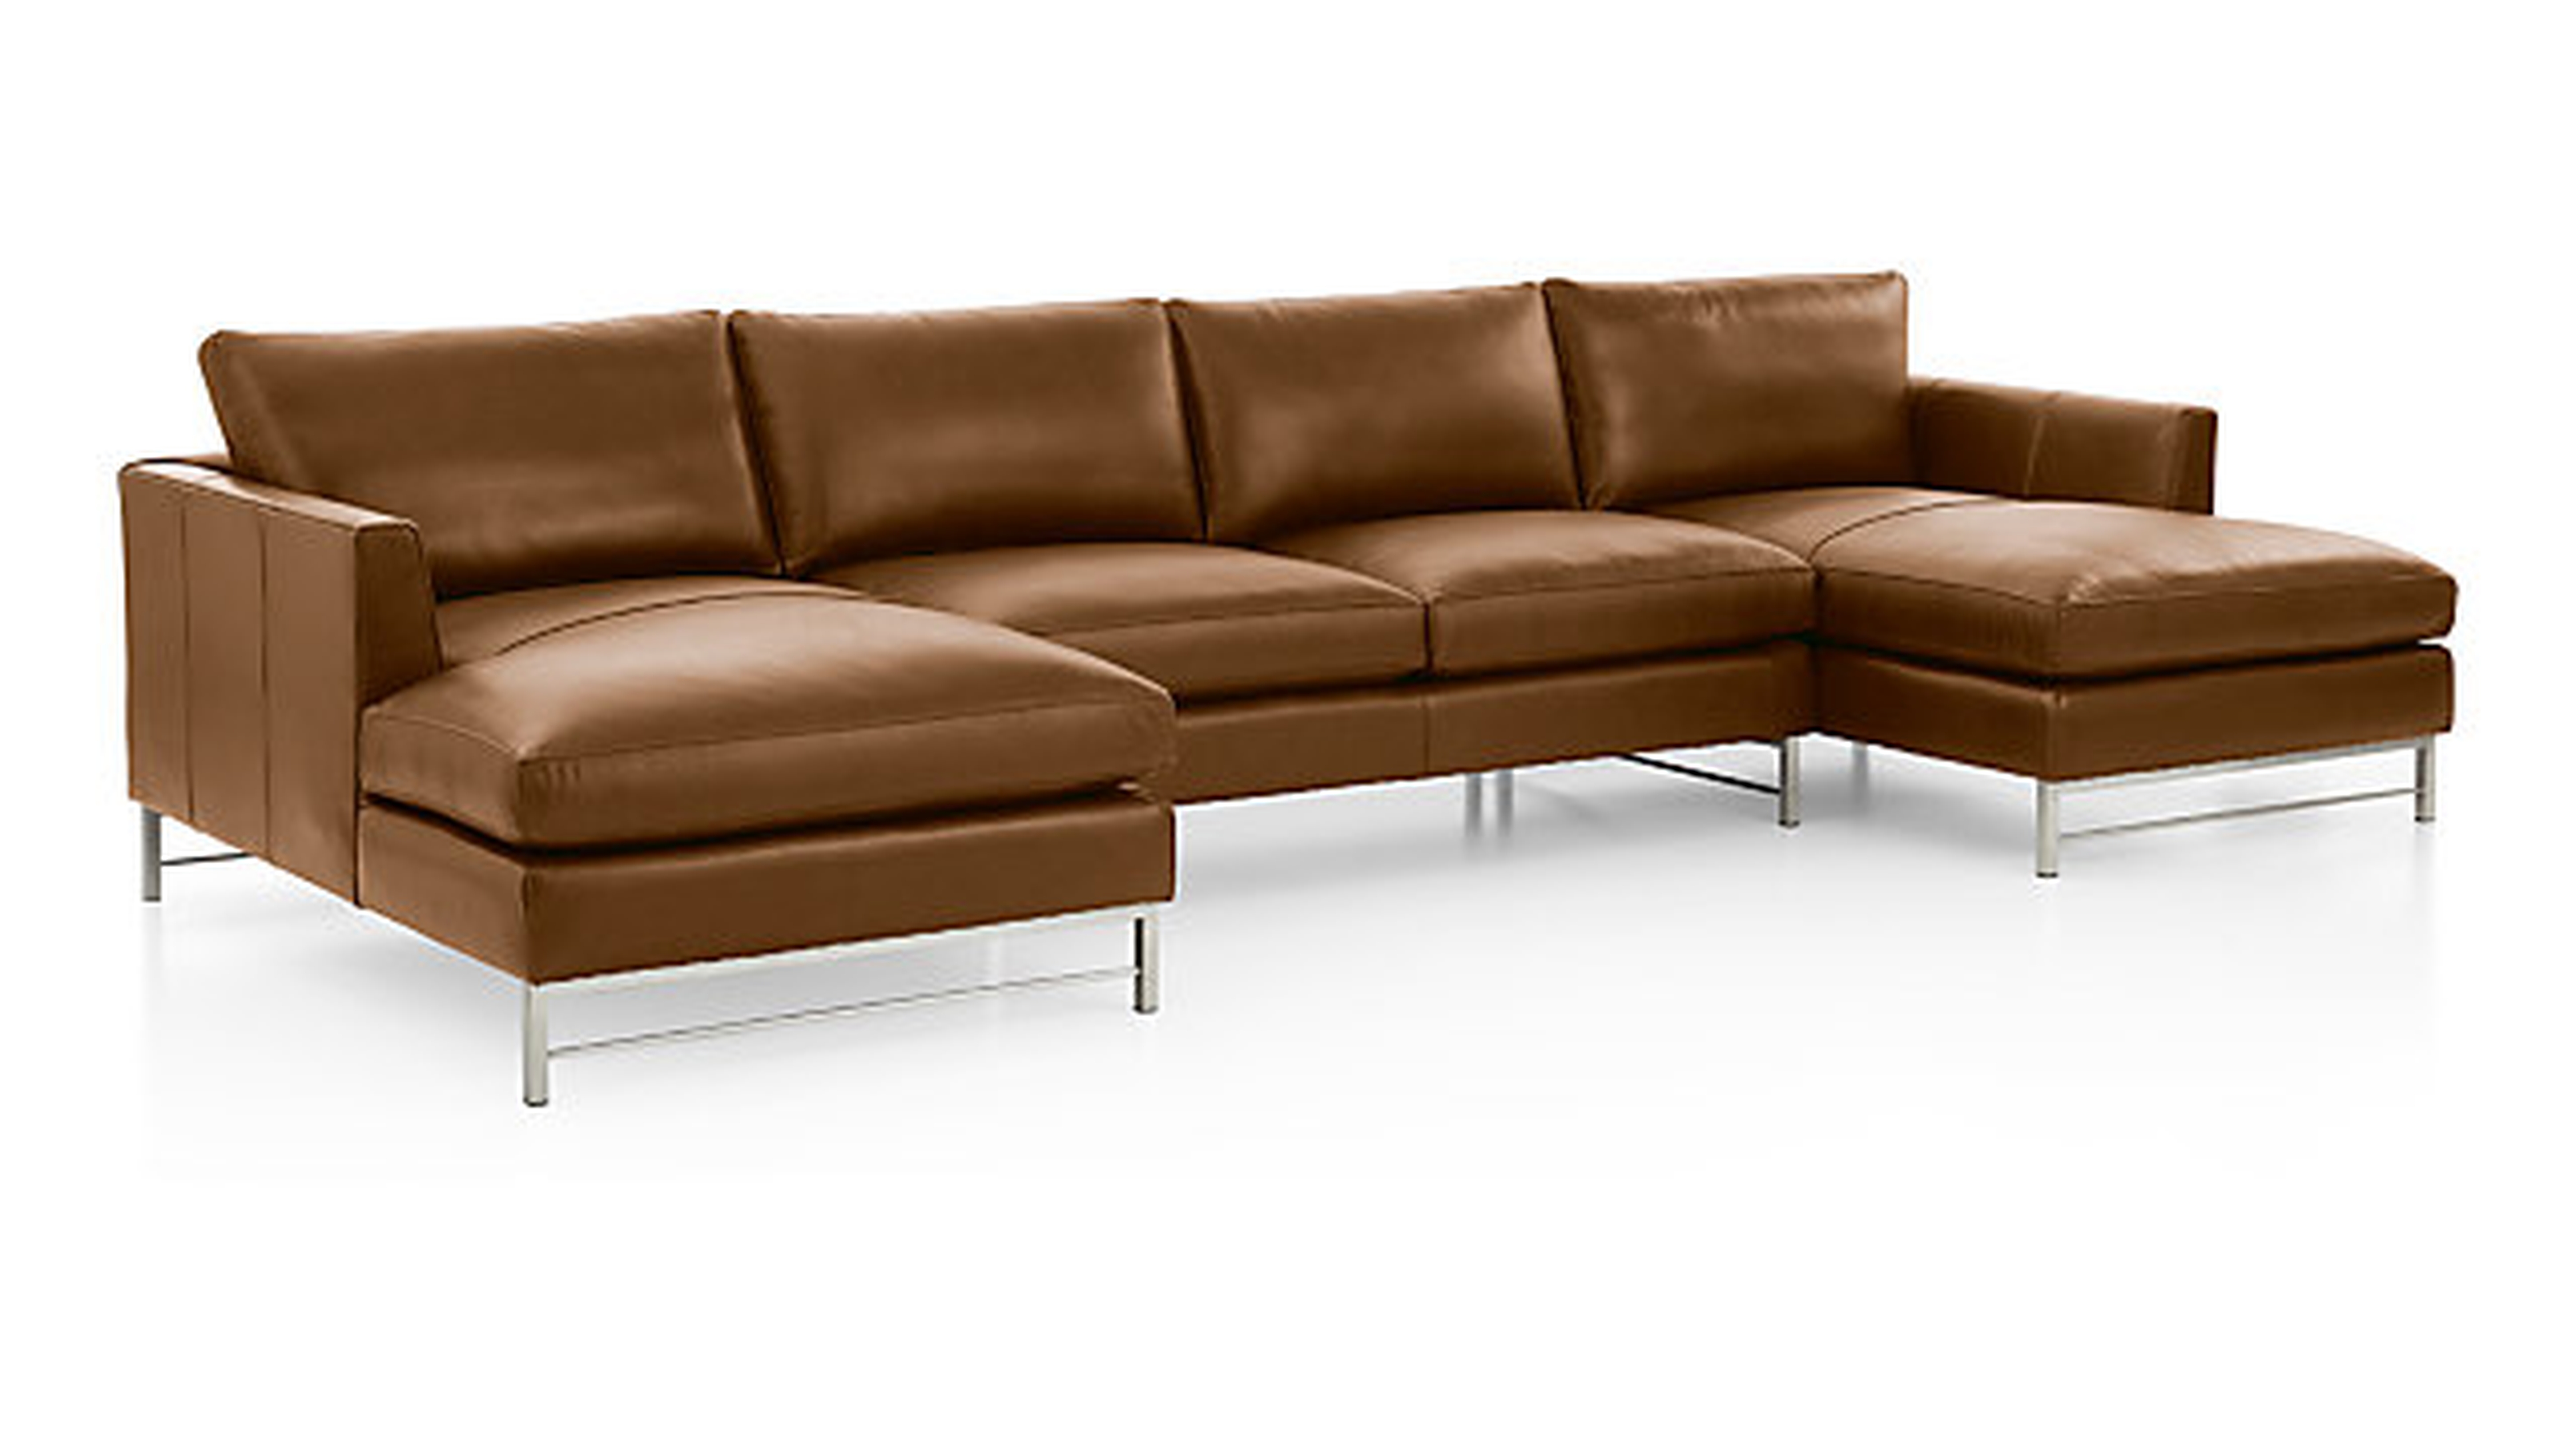 Tyson Leather 3-Piece Chaise Sectional with Stainless Steel Base LOGAN WHISKEY - Crate and Barrel